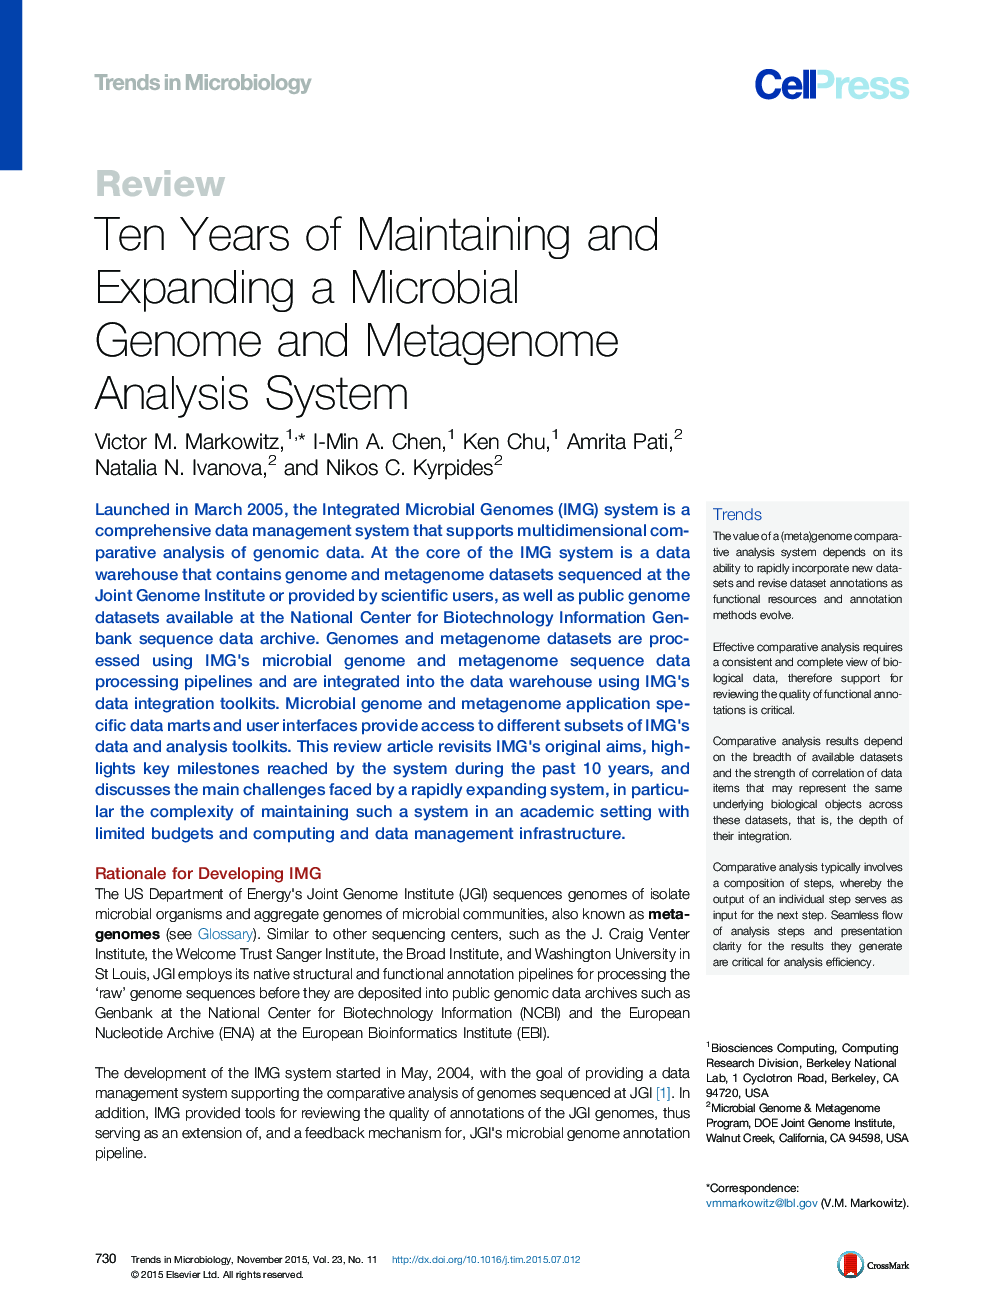 Ten Years of Maintaining and Expanding a Microbial Genome and Metagenome Analysis System